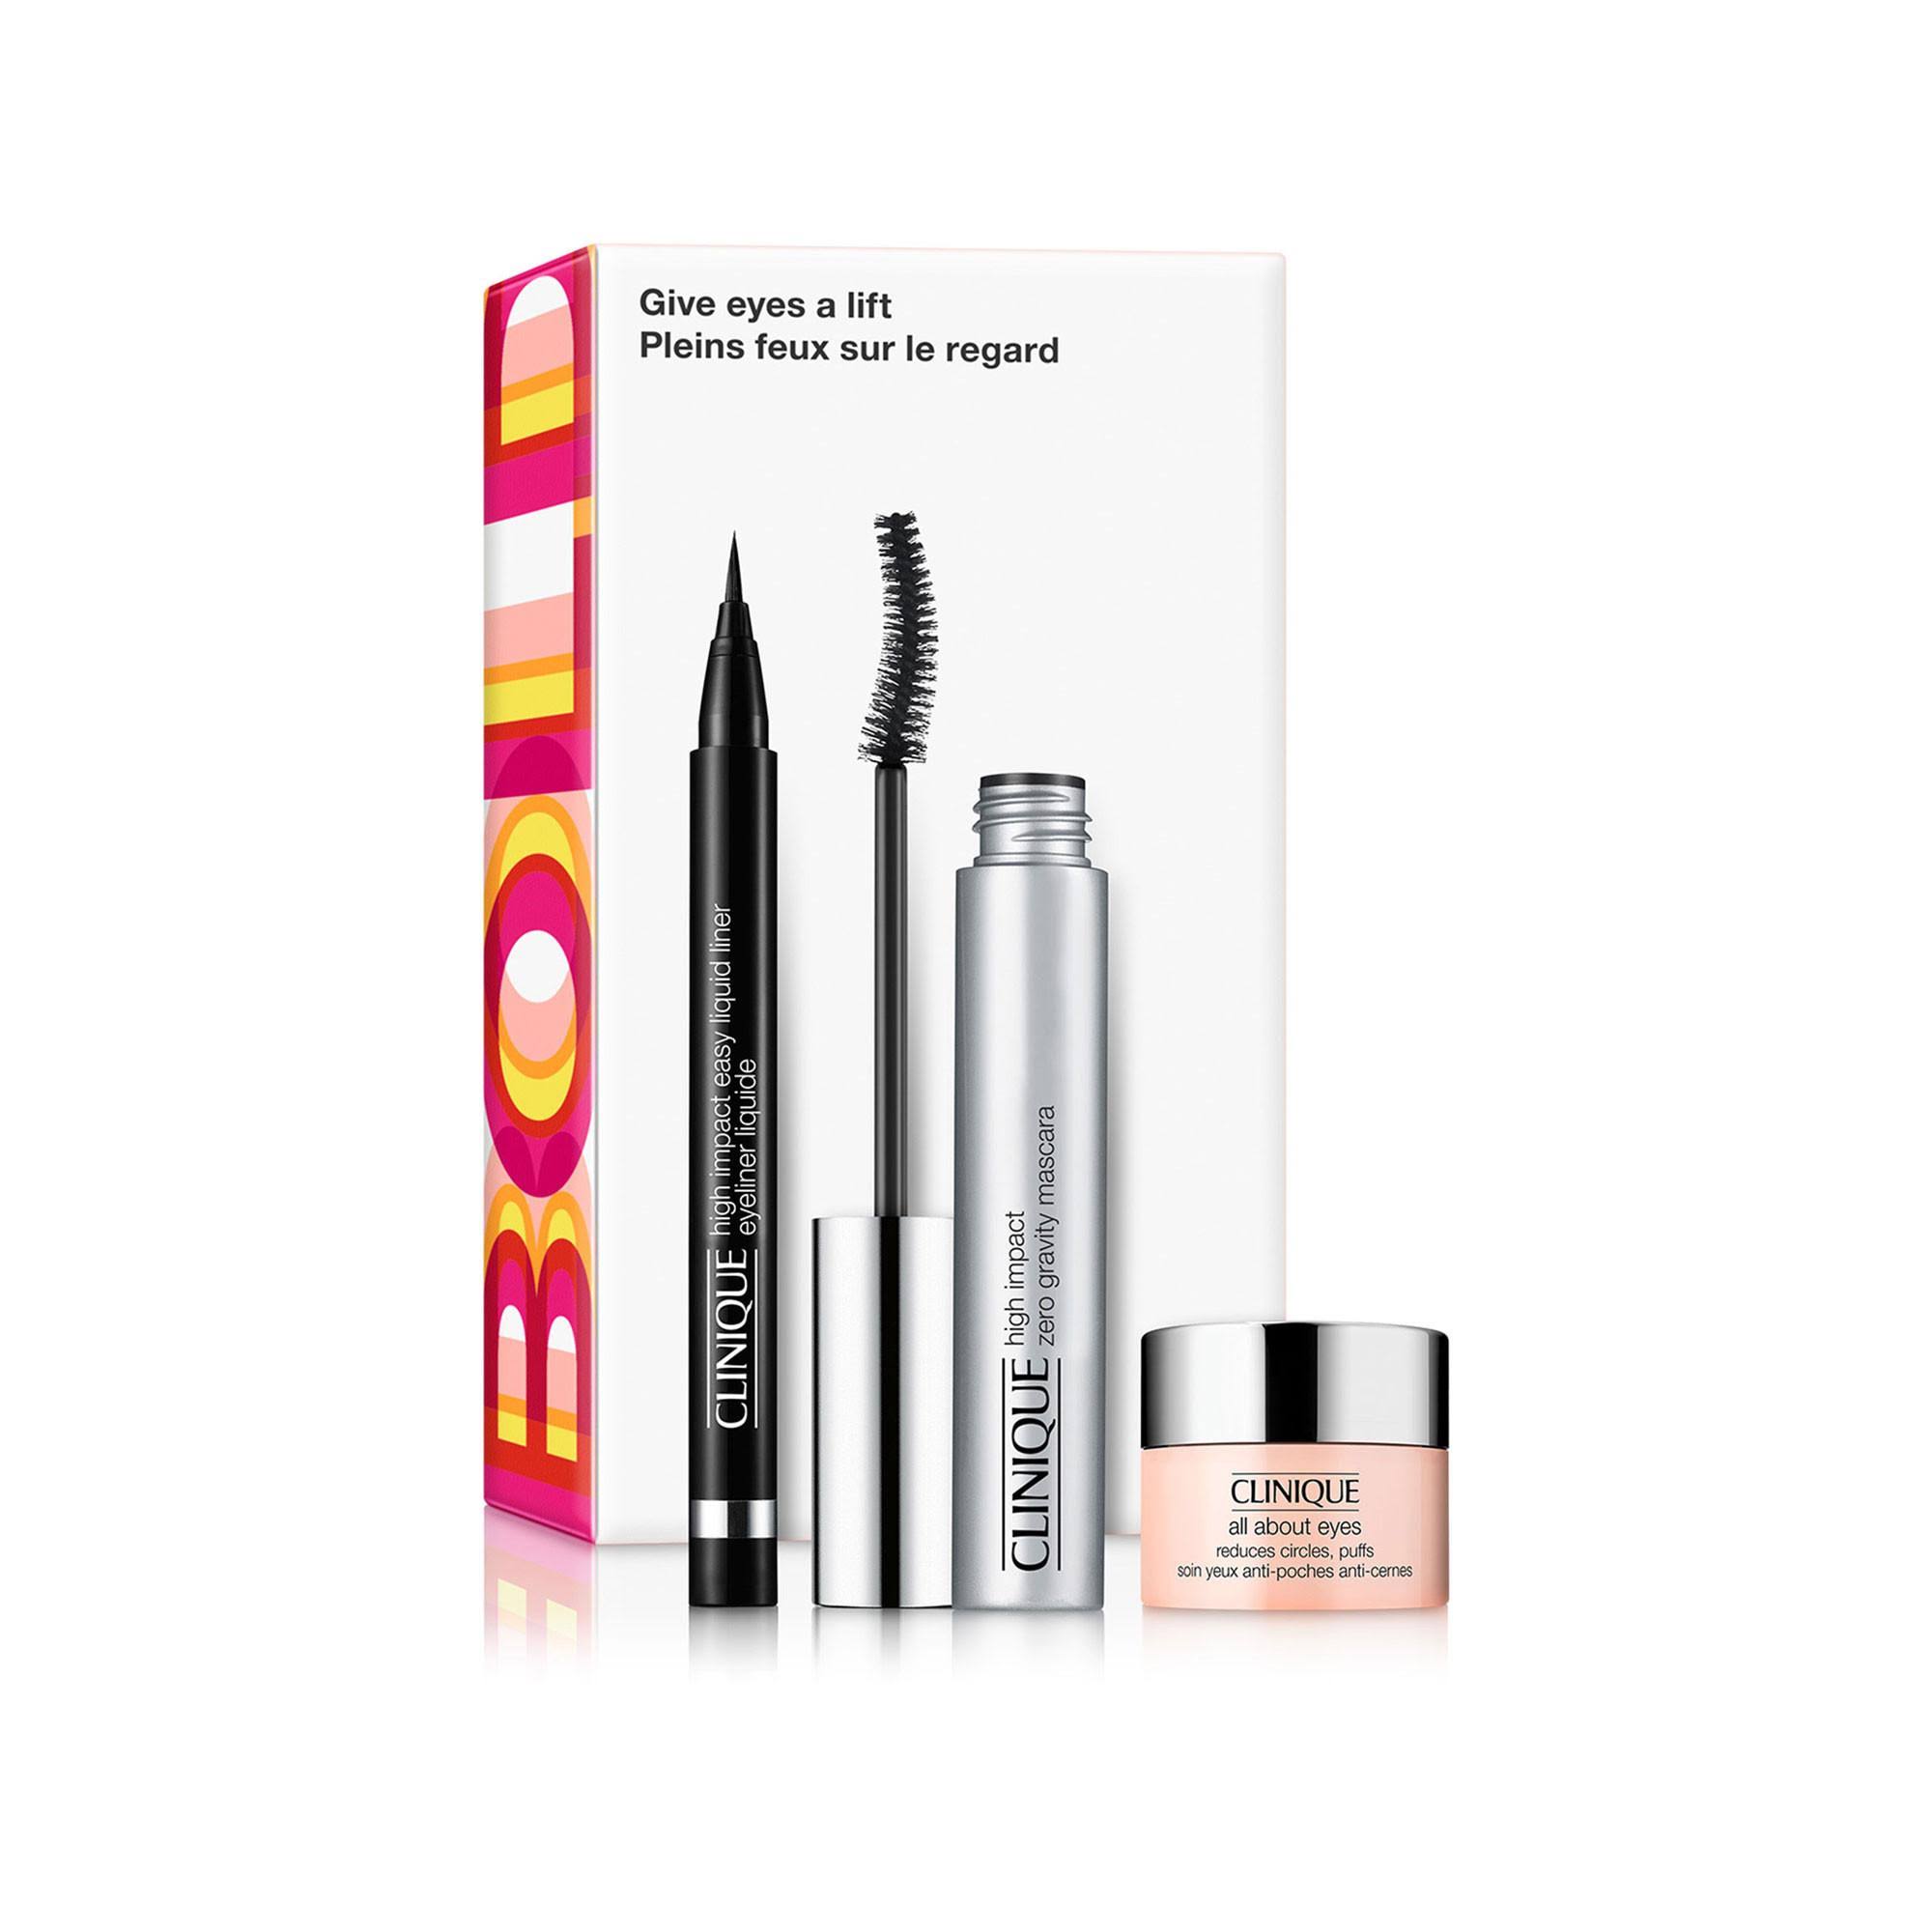 CLINIQUE Give Eyes A Lift Gift Set